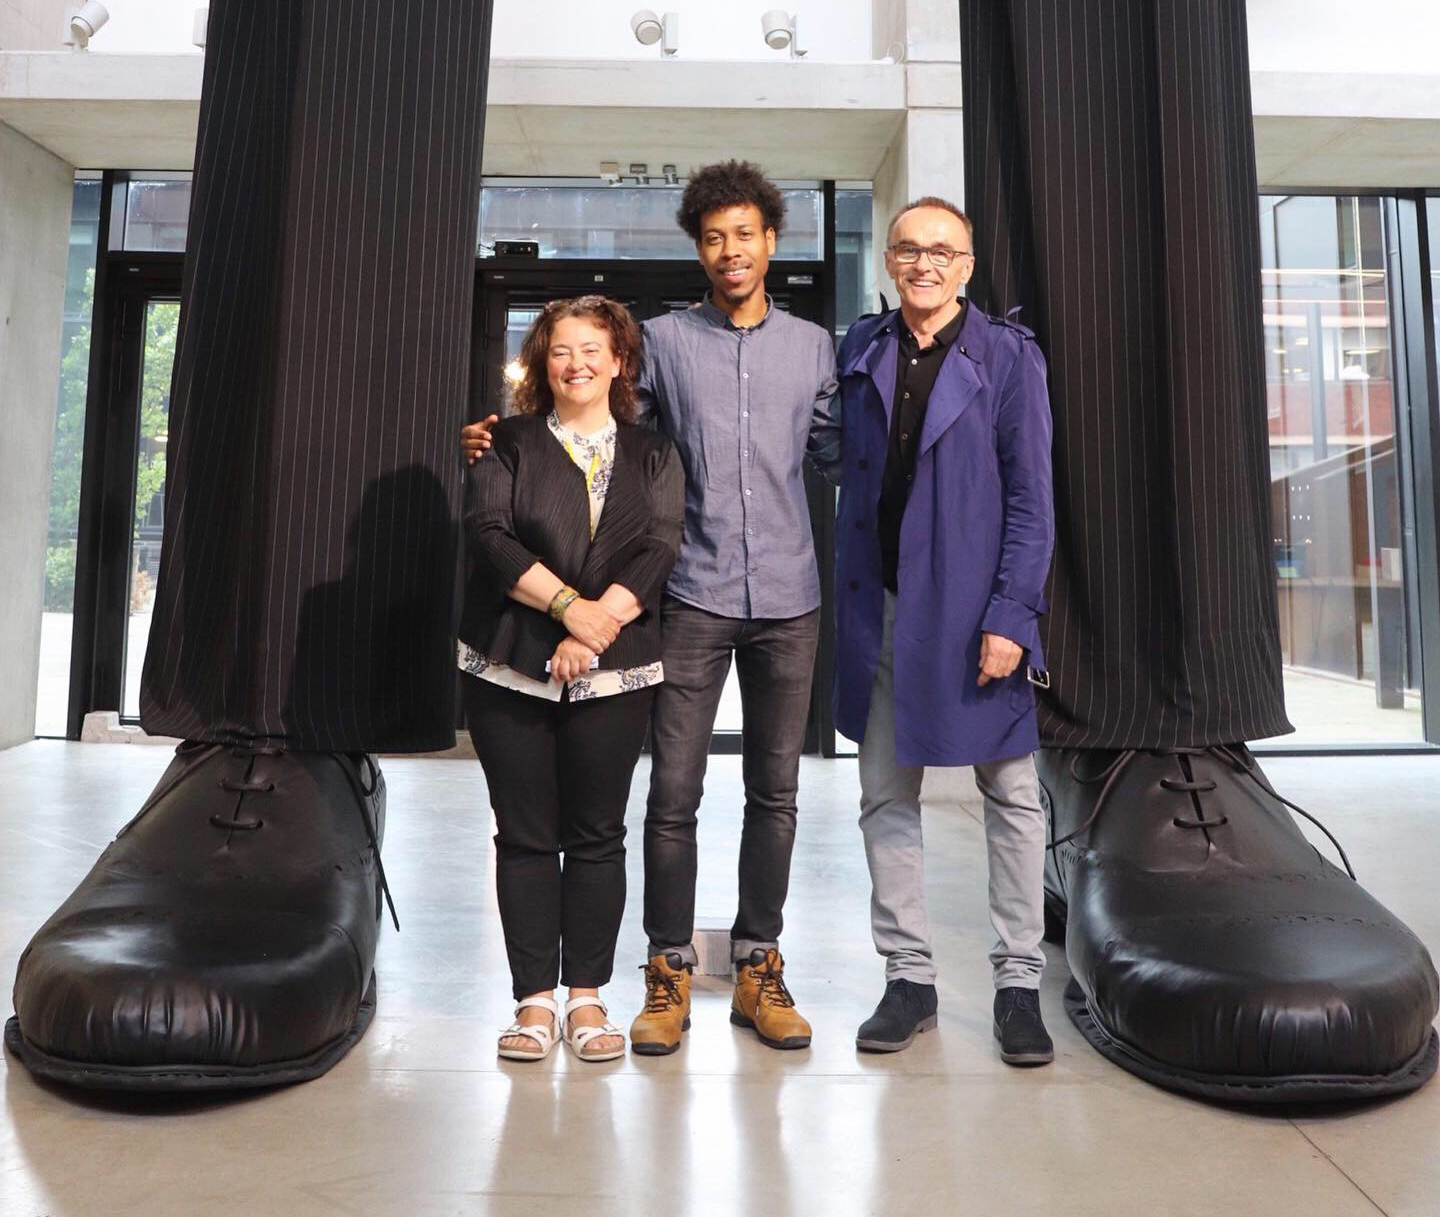 Penny Macbeth, Deputy Faculty Pro-Vice Chancellor and Dean of Manchester School of Art, with recent graduate and glassblower, Jahday Ford, and film director, Danny Boyle, at the Degree Show launch night